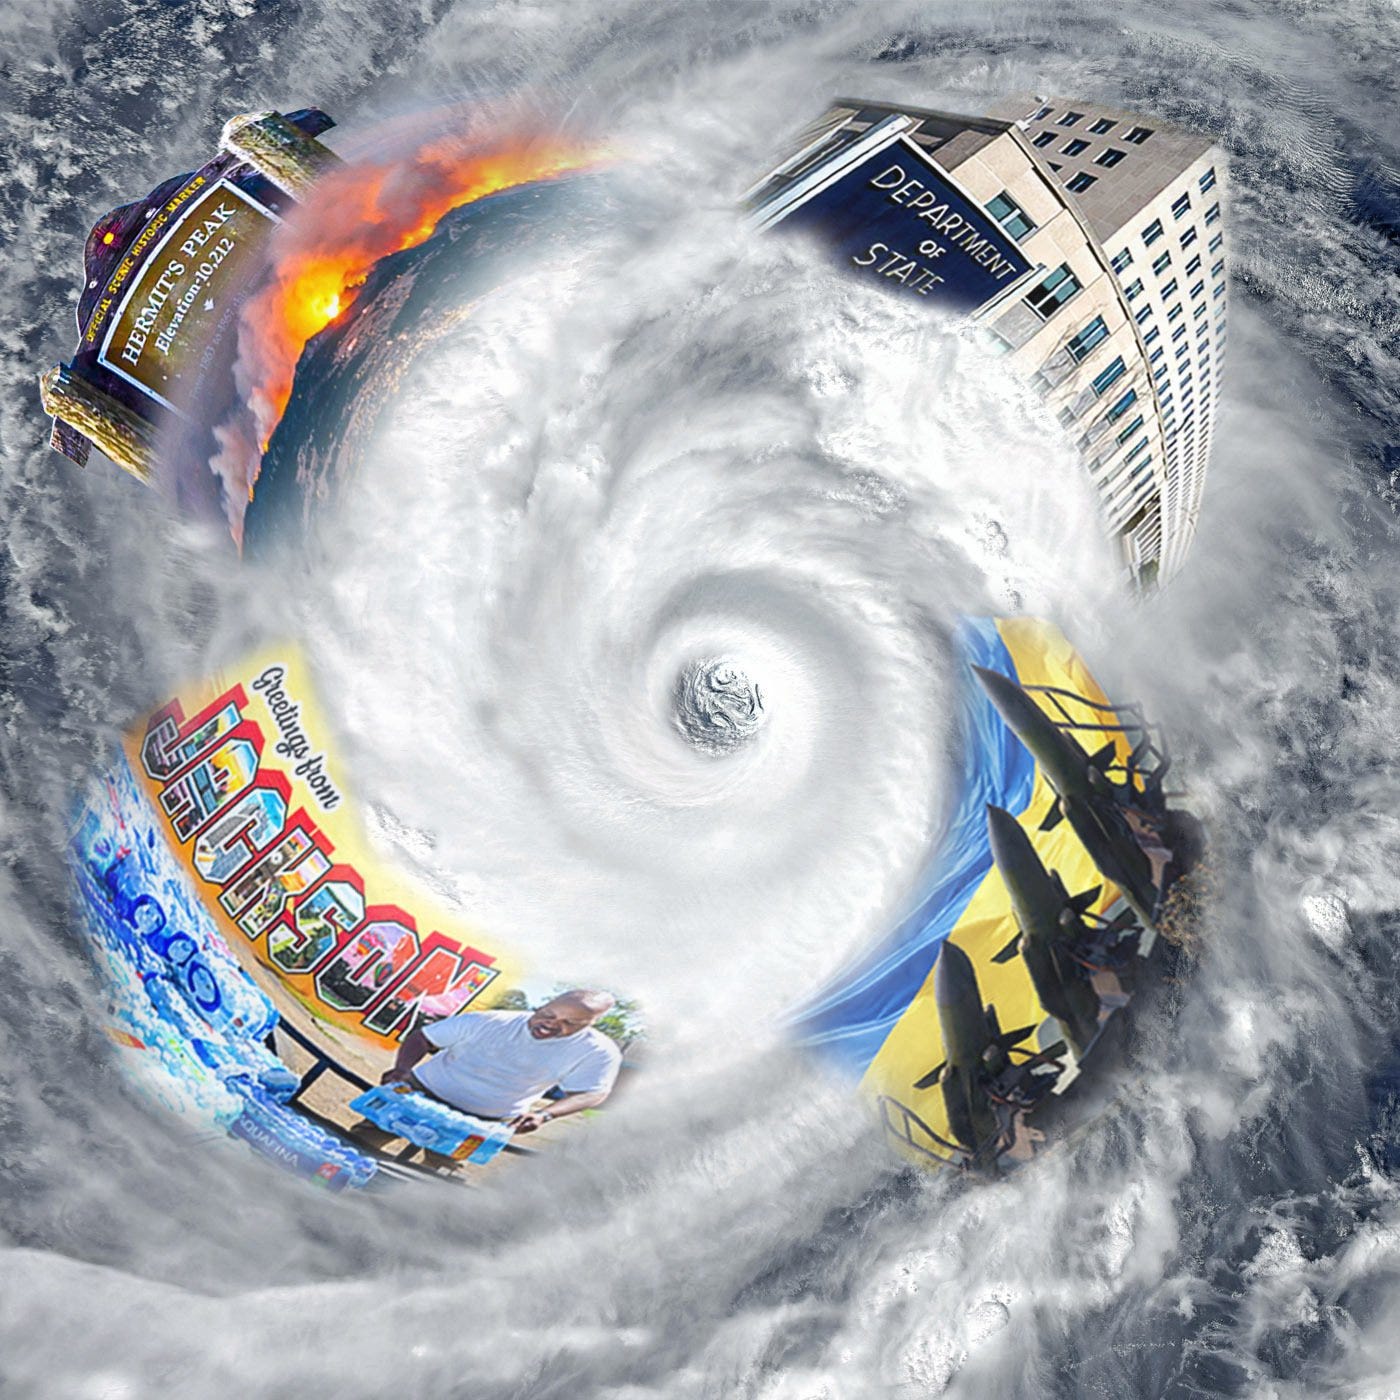 Promo image for new ep. of Congressional Dish: Hurricane of problems